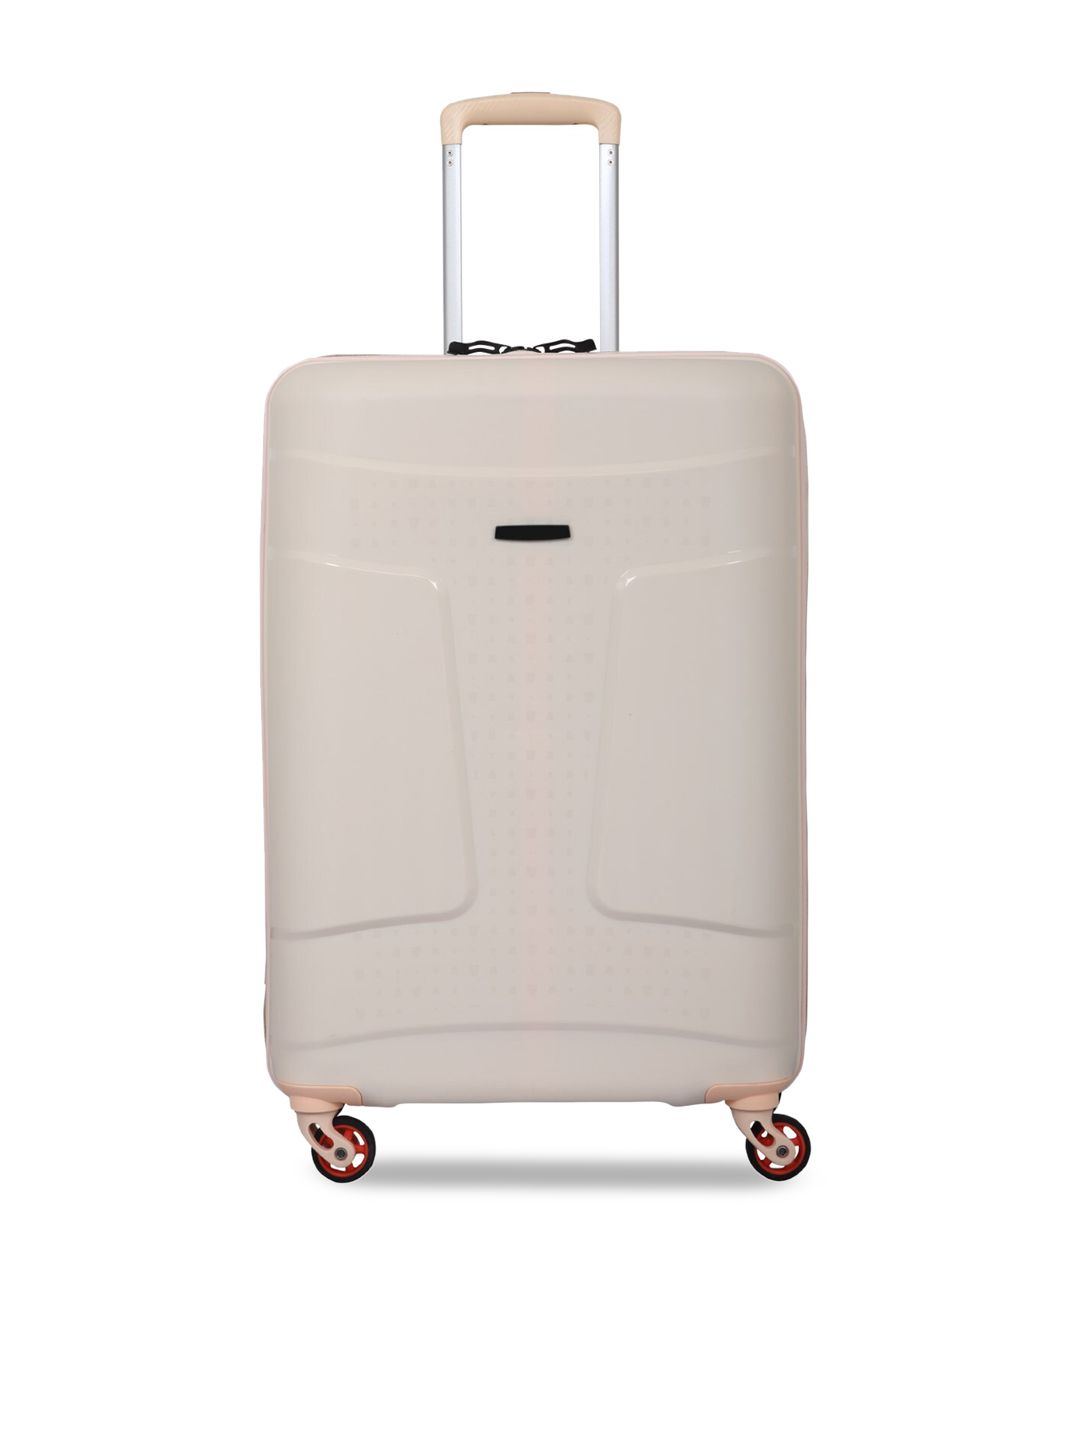 Polo Class Beige Scan Trolley Bag - 24 inch Price in India